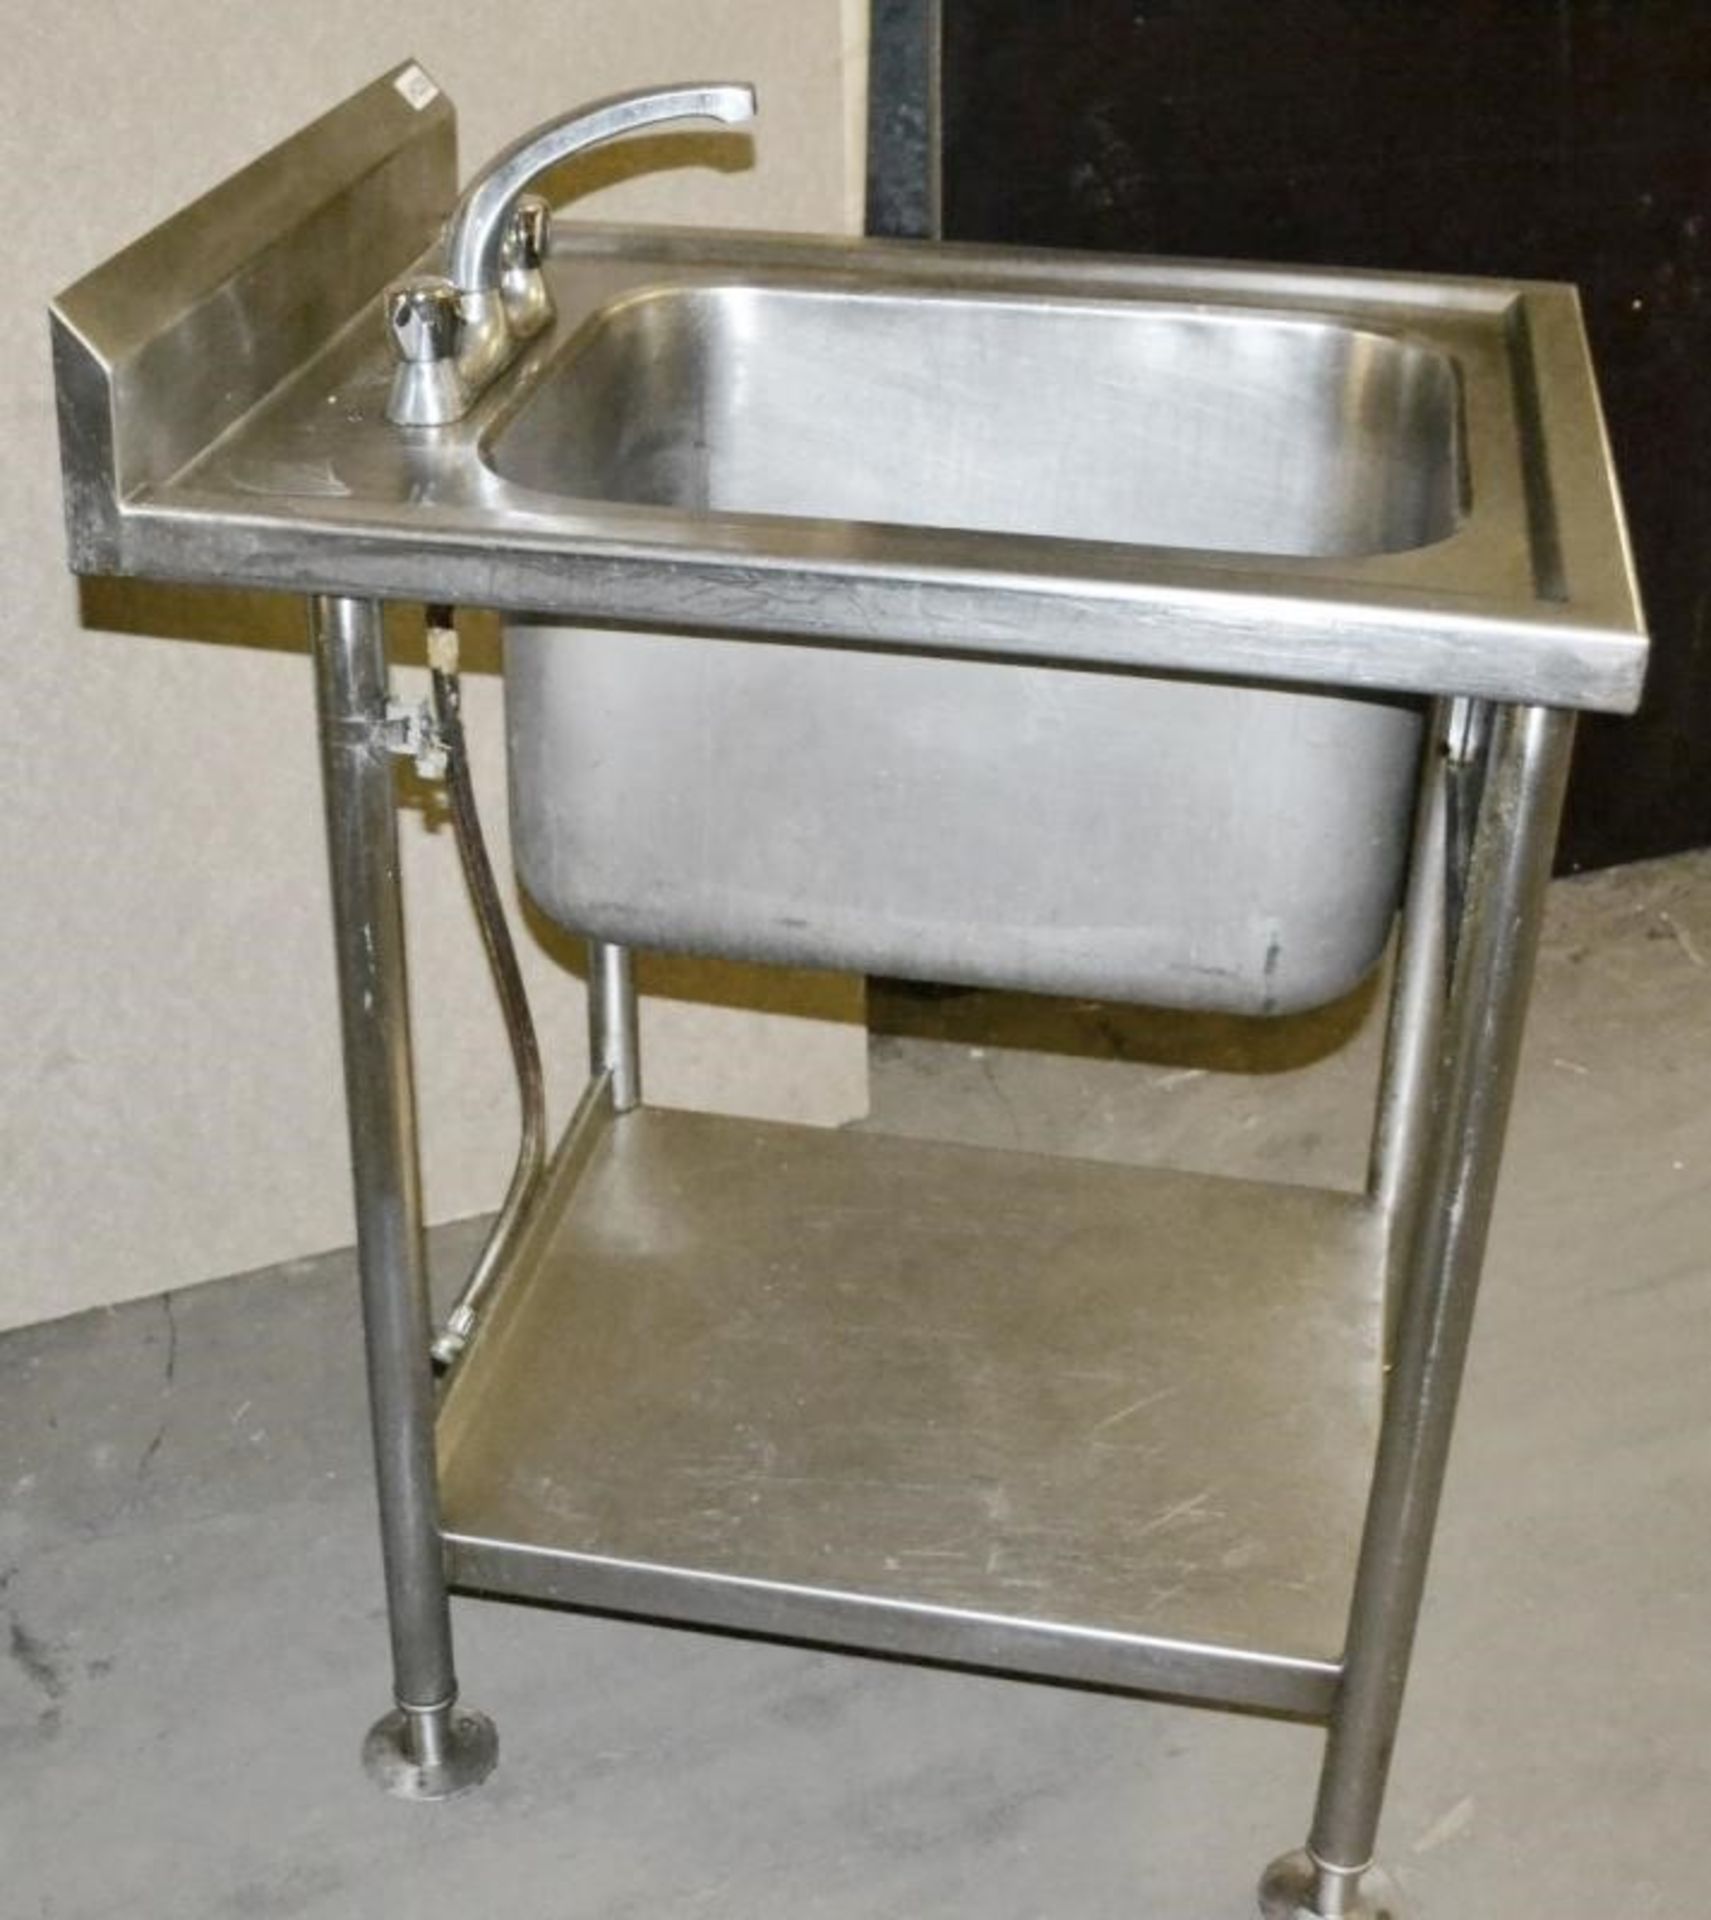 1 x Stainless Steel Commercial Sink Unit / Wash Station With Mixer Tap, Spillage Lip, Splashback and - Image 6 of 7